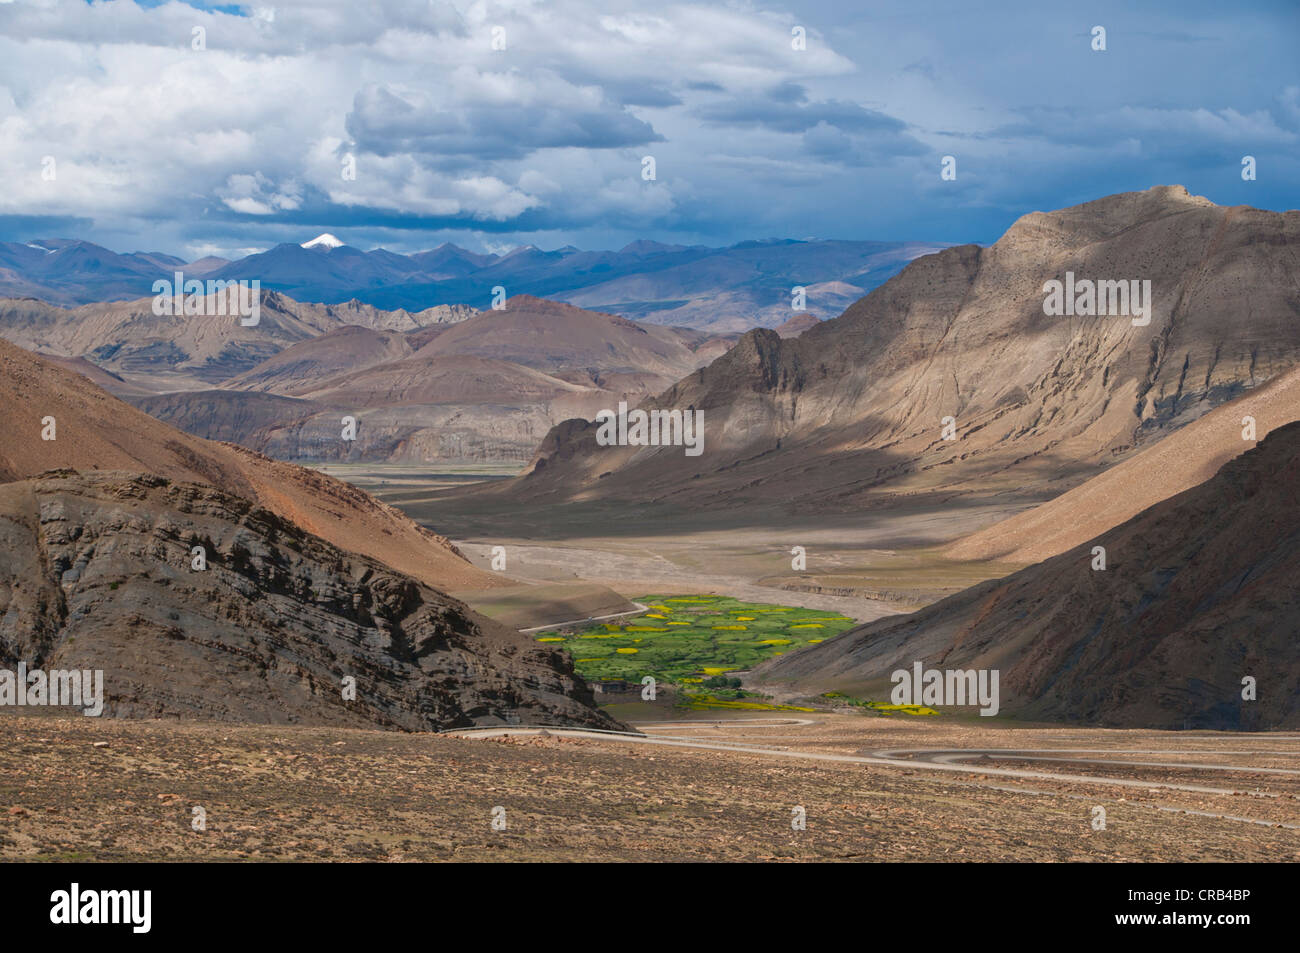 Rugged Himalayan scenery along the road to Mount Everest, Tibet, Asia Stock Photo